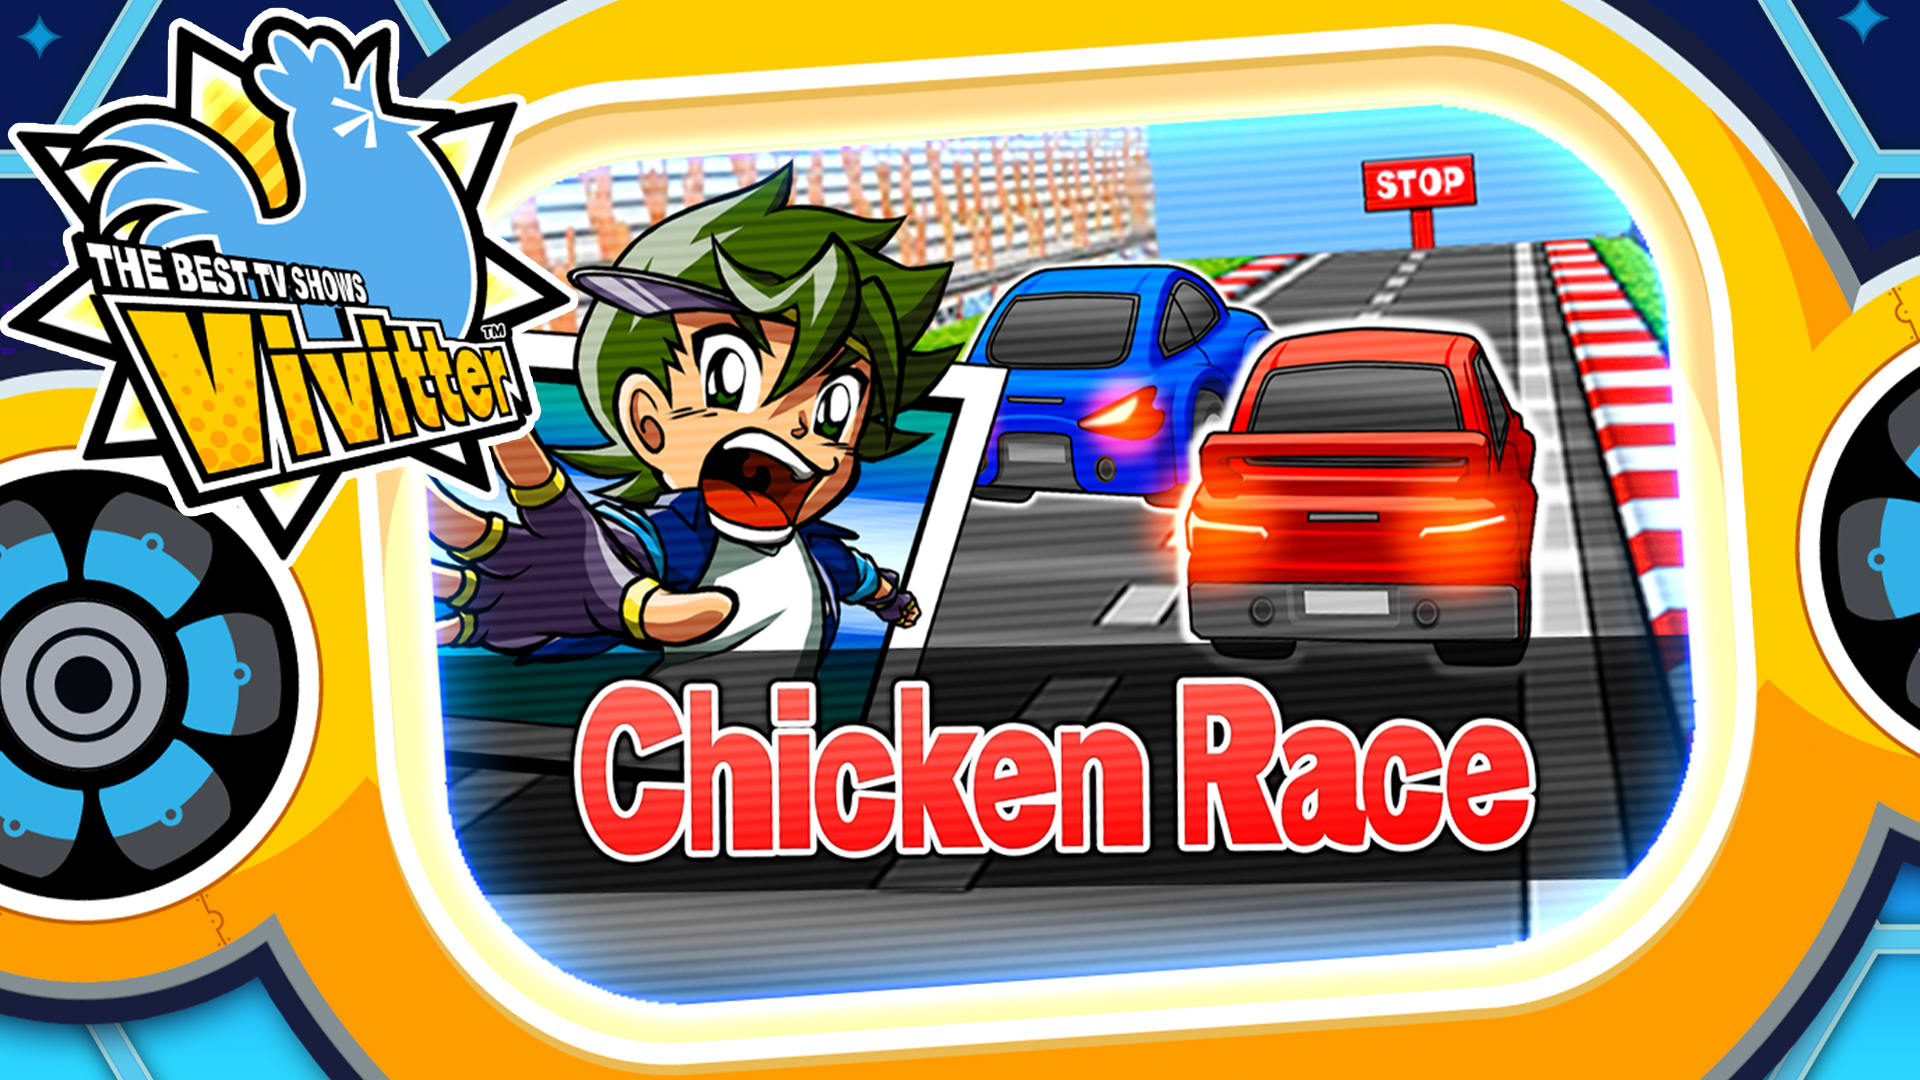 Additional mini-game "Chicken Race"